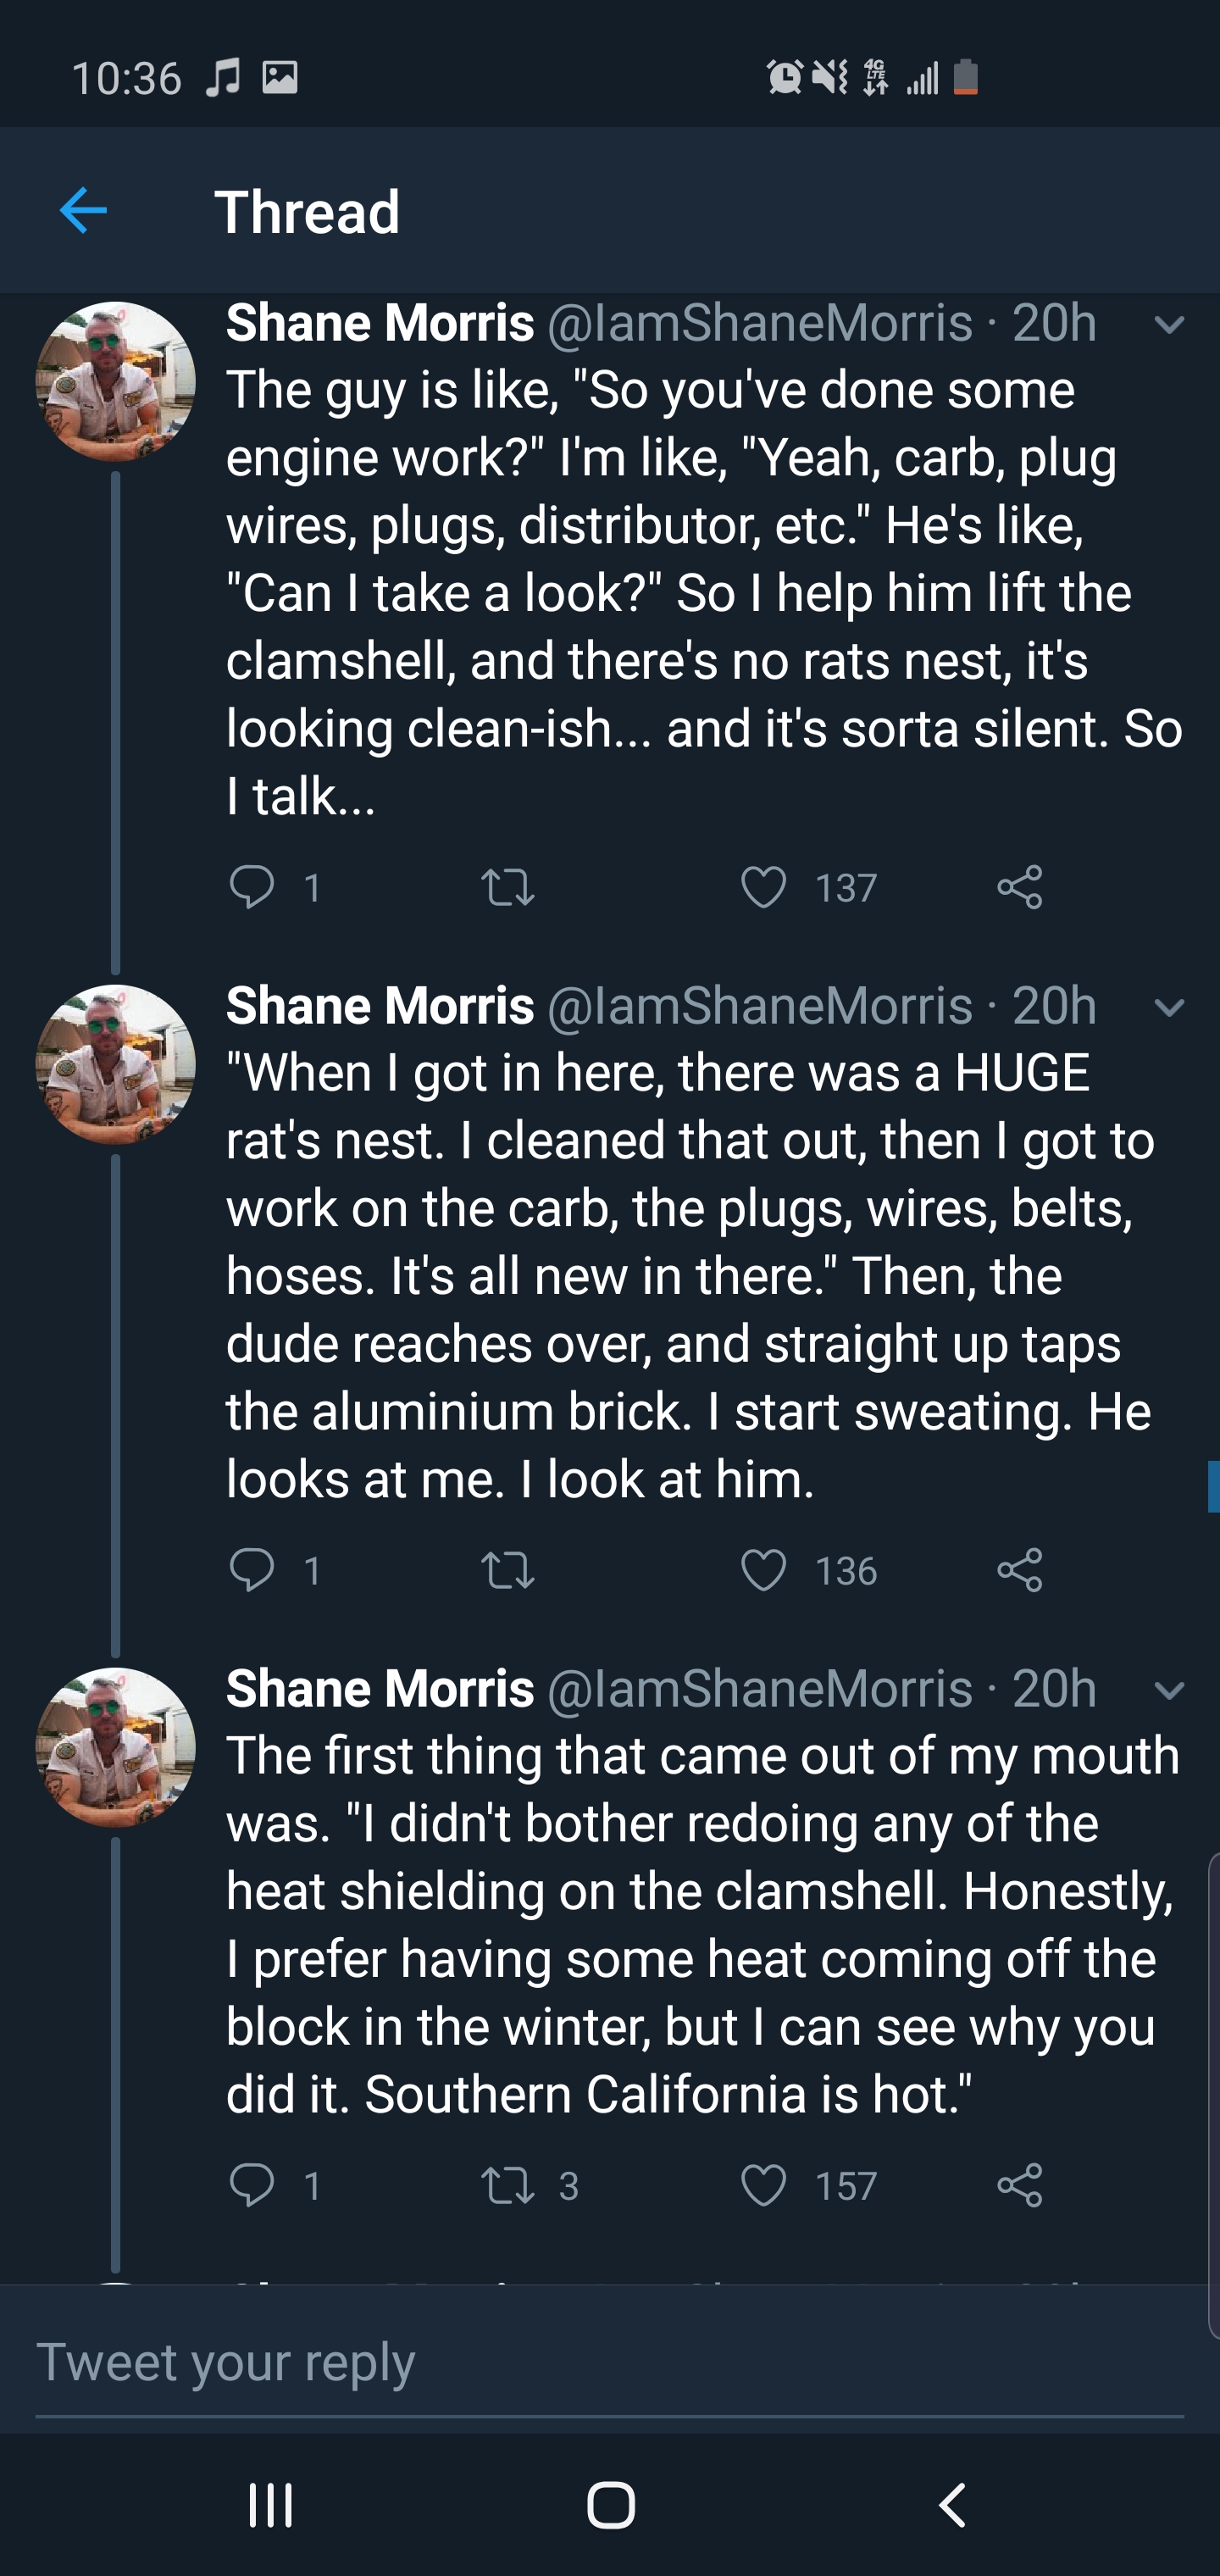 screenshot - On Thread Shane Morris 20h The guy is , 'So you've done some engine work?" I'm , "Yeah, carb, plug wires, plugs, distributor, etc." He's , "Can I take a look?' So I help him lift the clamshell, and there's no rats nest, it's looking cleanish.